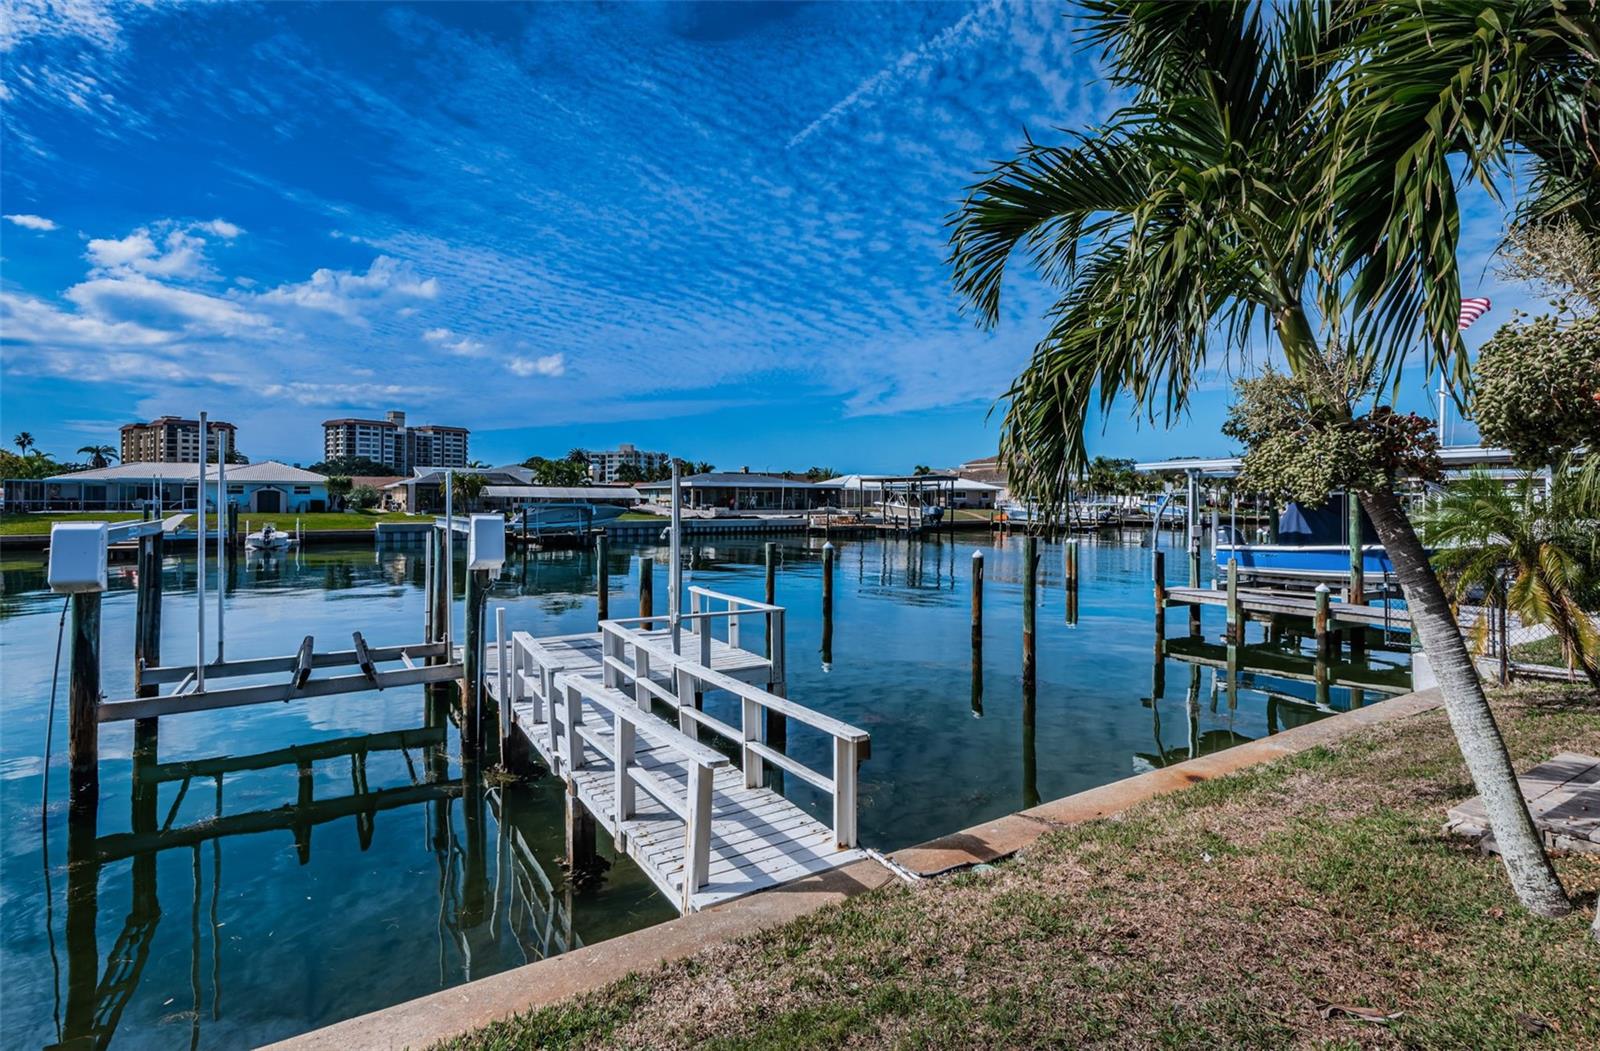 This property not only boasts a captivating waterview but also features a convenient dock and a ready-to-use boatlift.